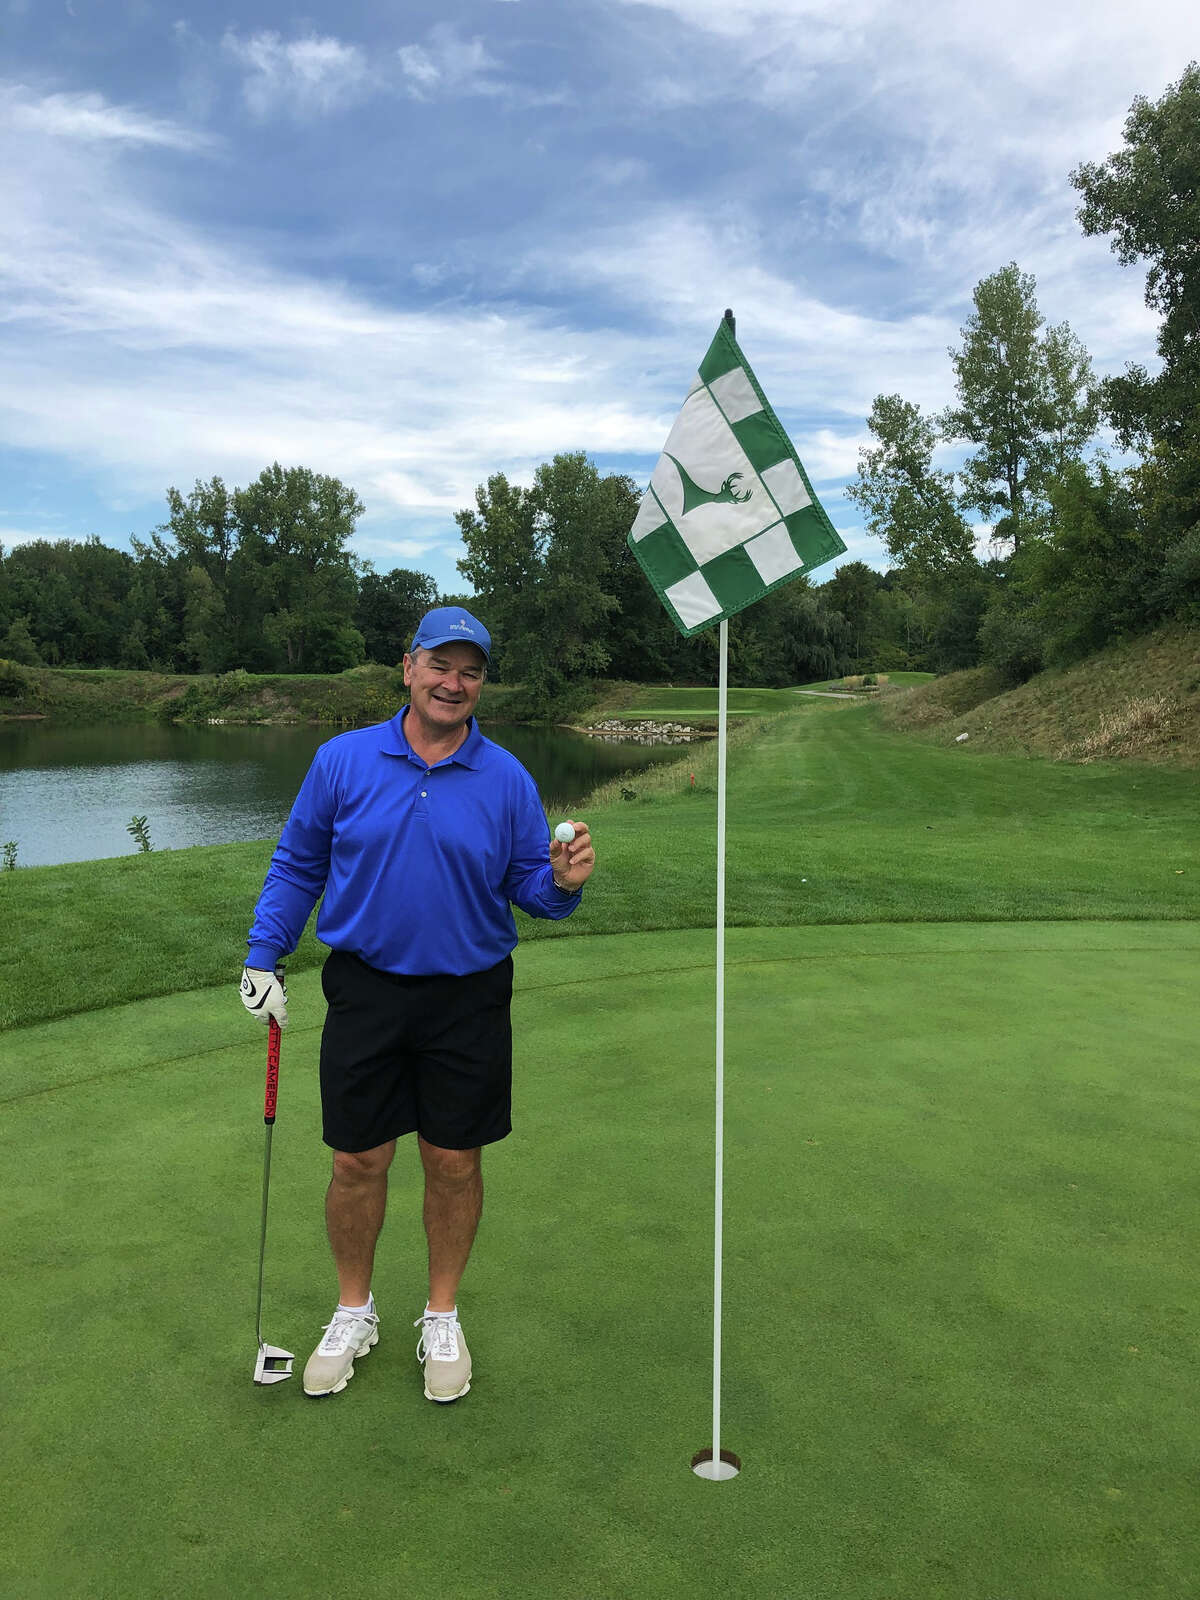 Gary Bryant stands with his golf ball near the cup of the eighth hole at Bucks Run, where he shot his second hole-in-one in three days recently.